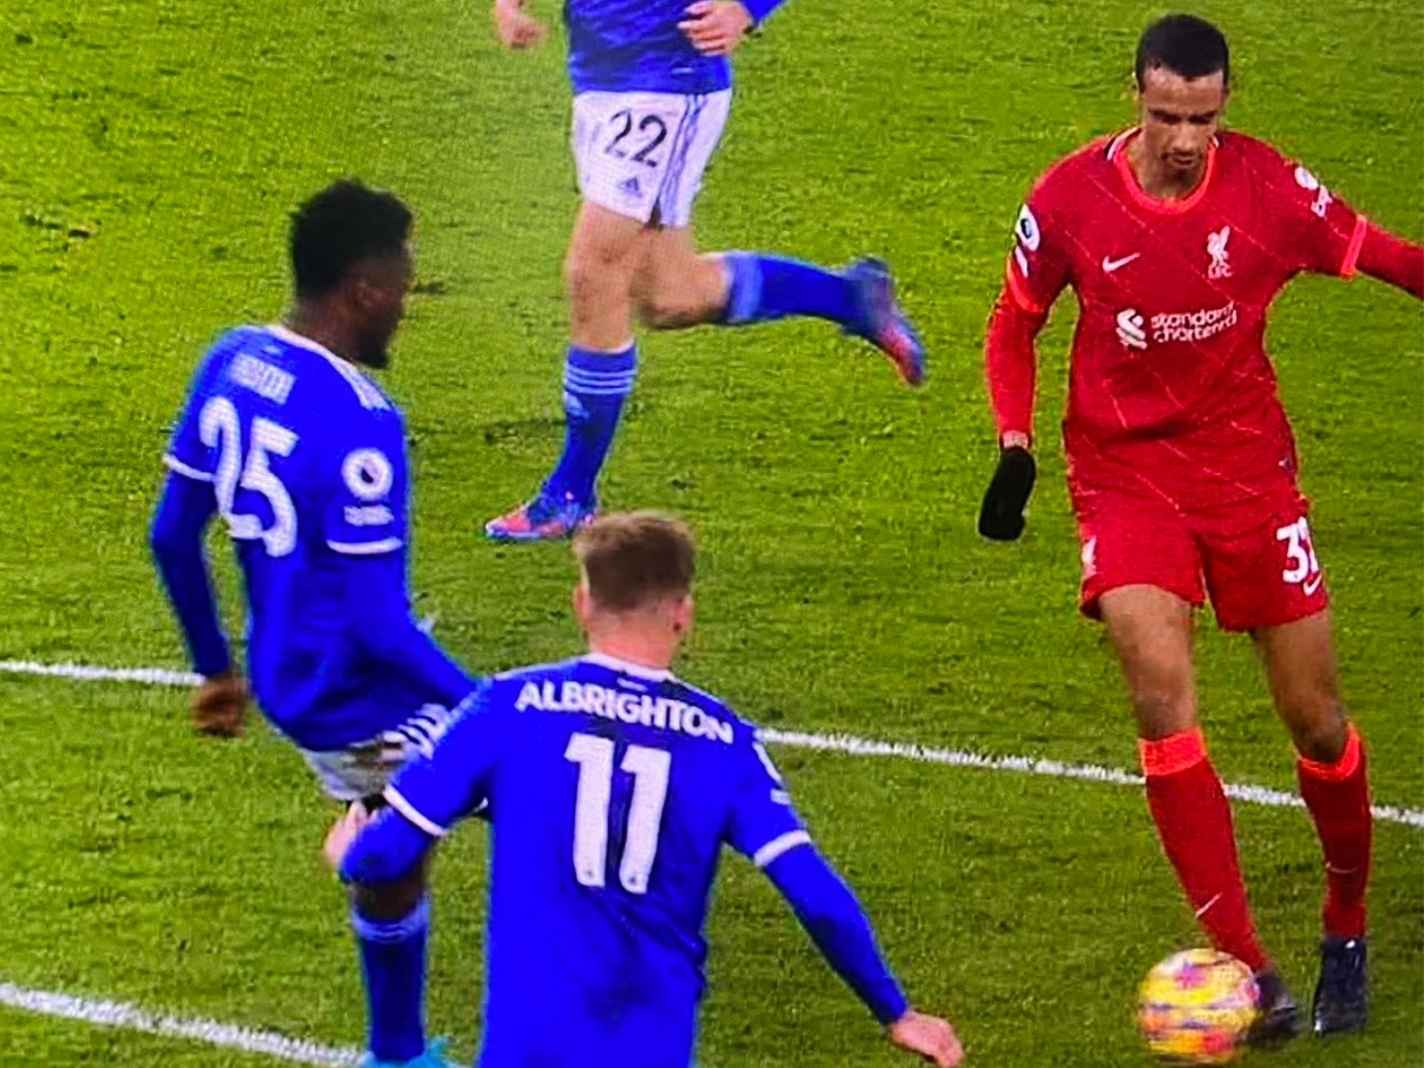 The sublime nutmeg assist from Joel Matip that caught Twitter by surprise